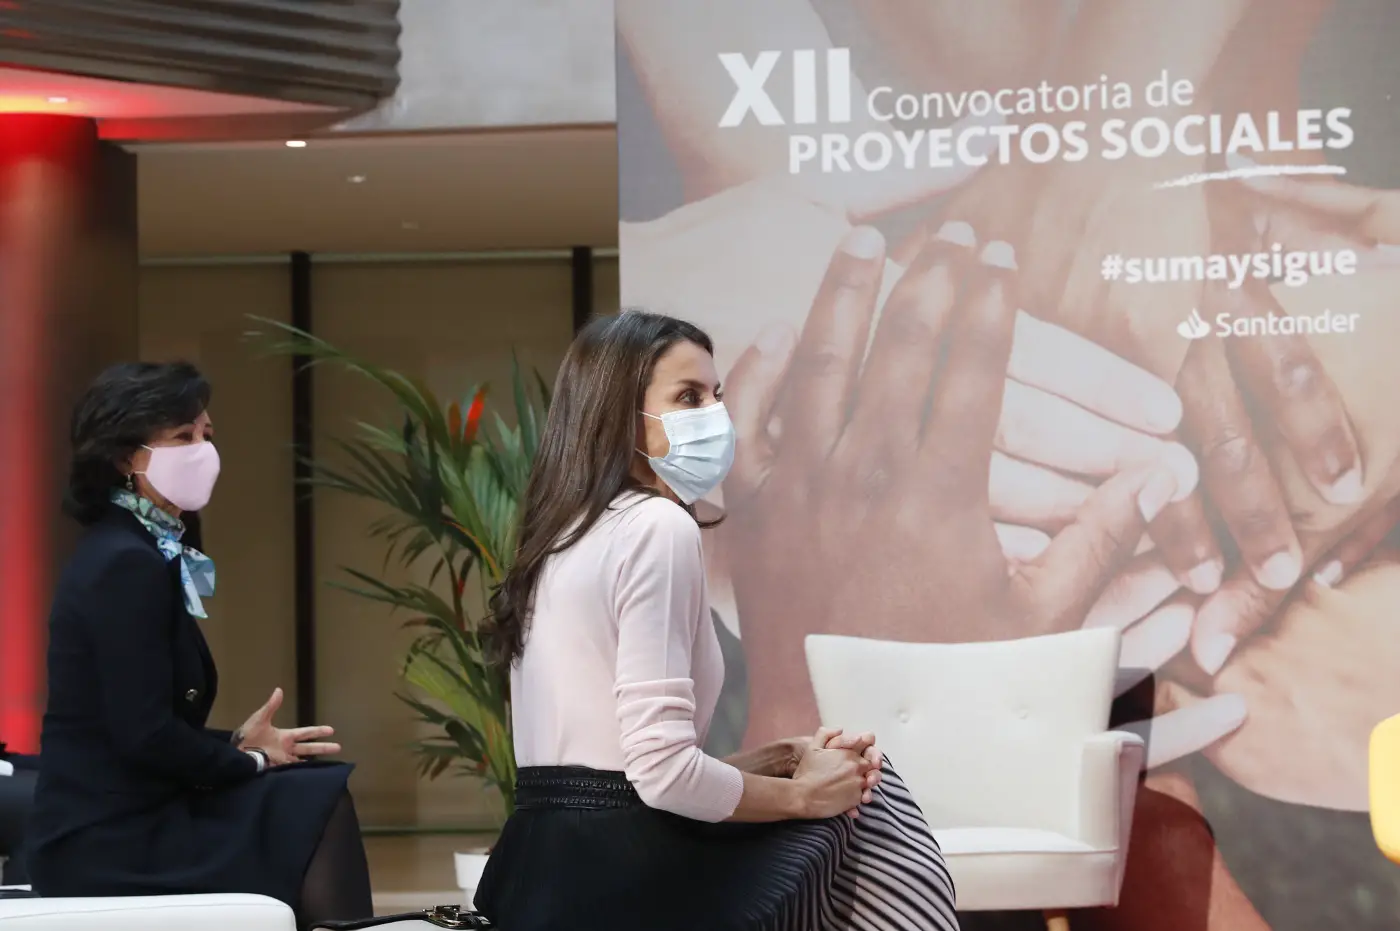 Queen Letizia of Spain presided over the closing ceremony of the XII Call for Social Projects of Banco Santander in Madrid